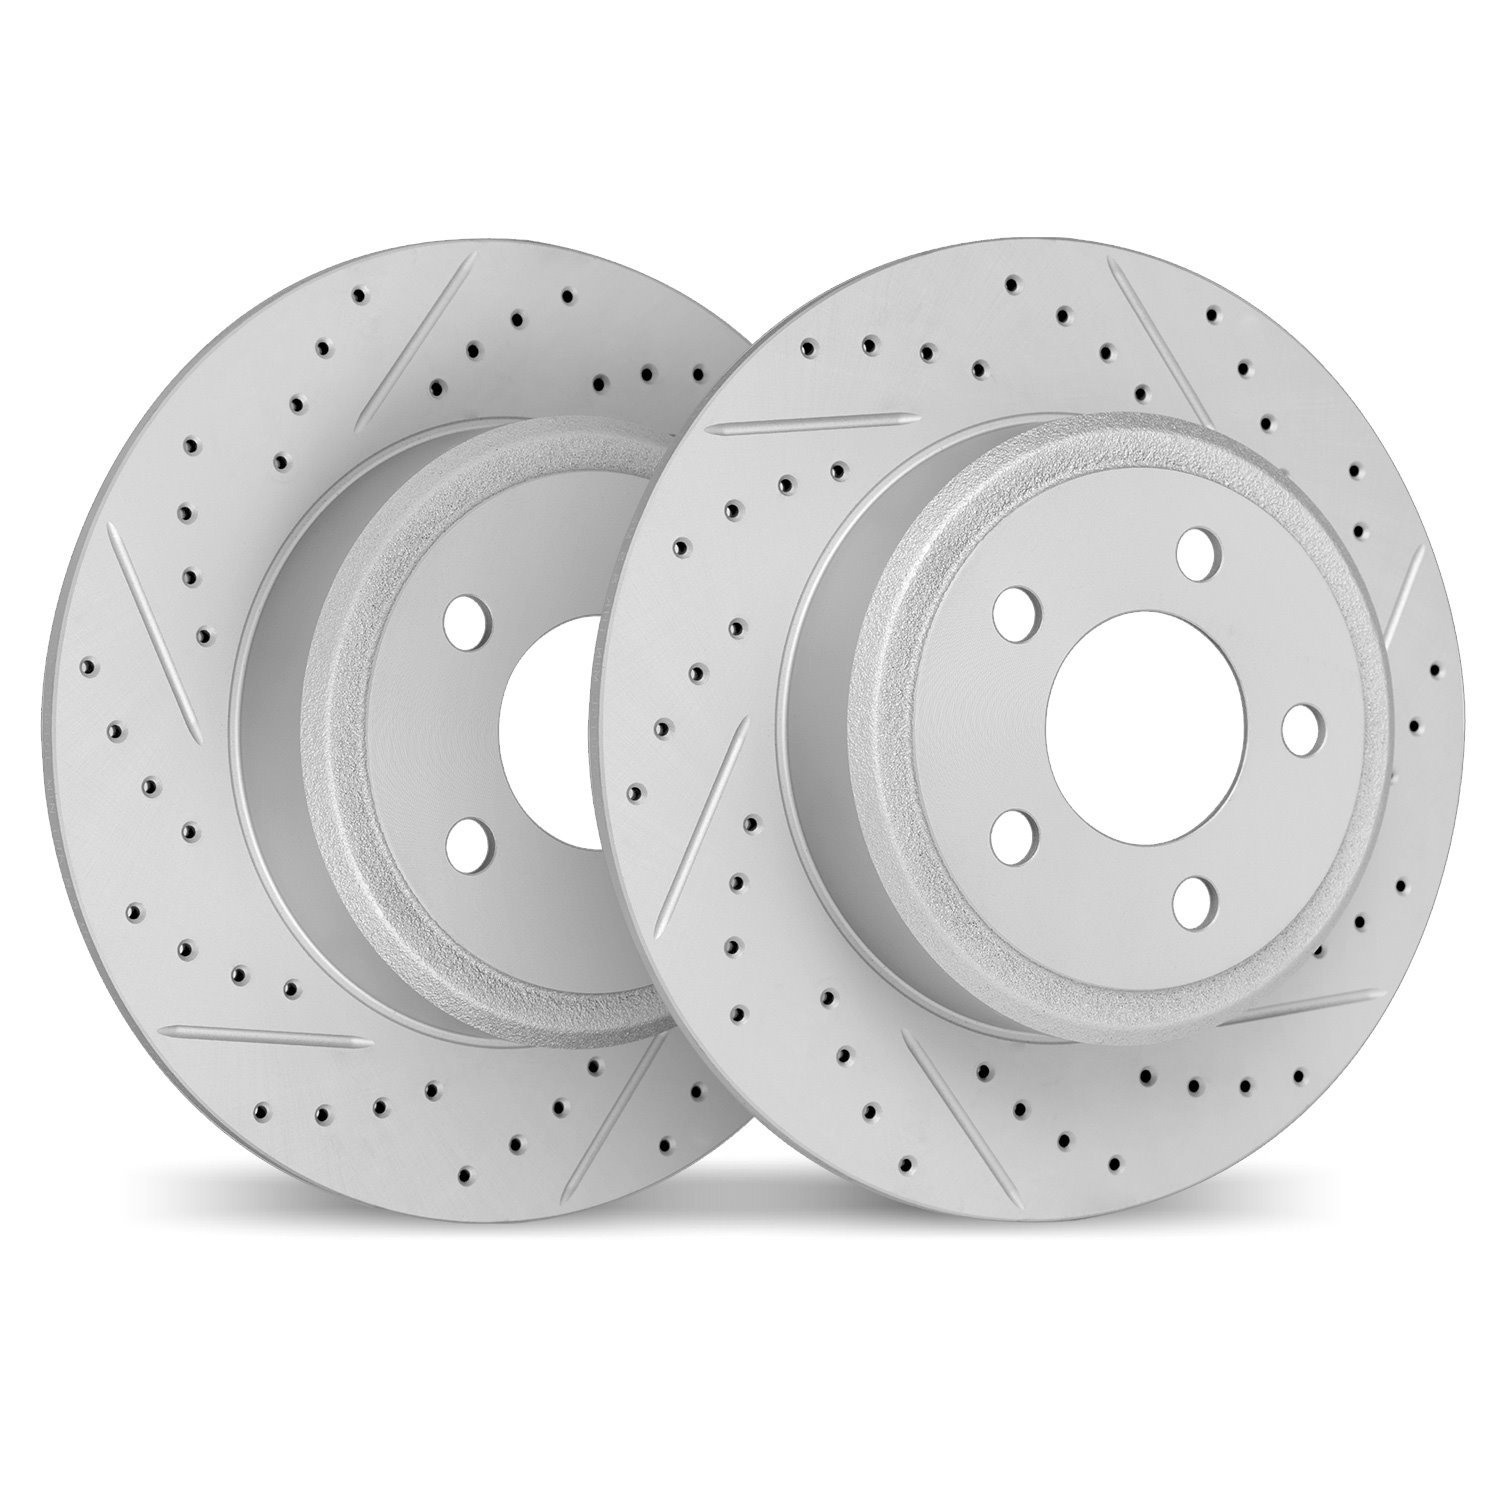 2002-76050 Geoperformance Drilled/Slotted Brake Rotors, 1999-2003 Lexus/Toyota/Scion, Position: Rear